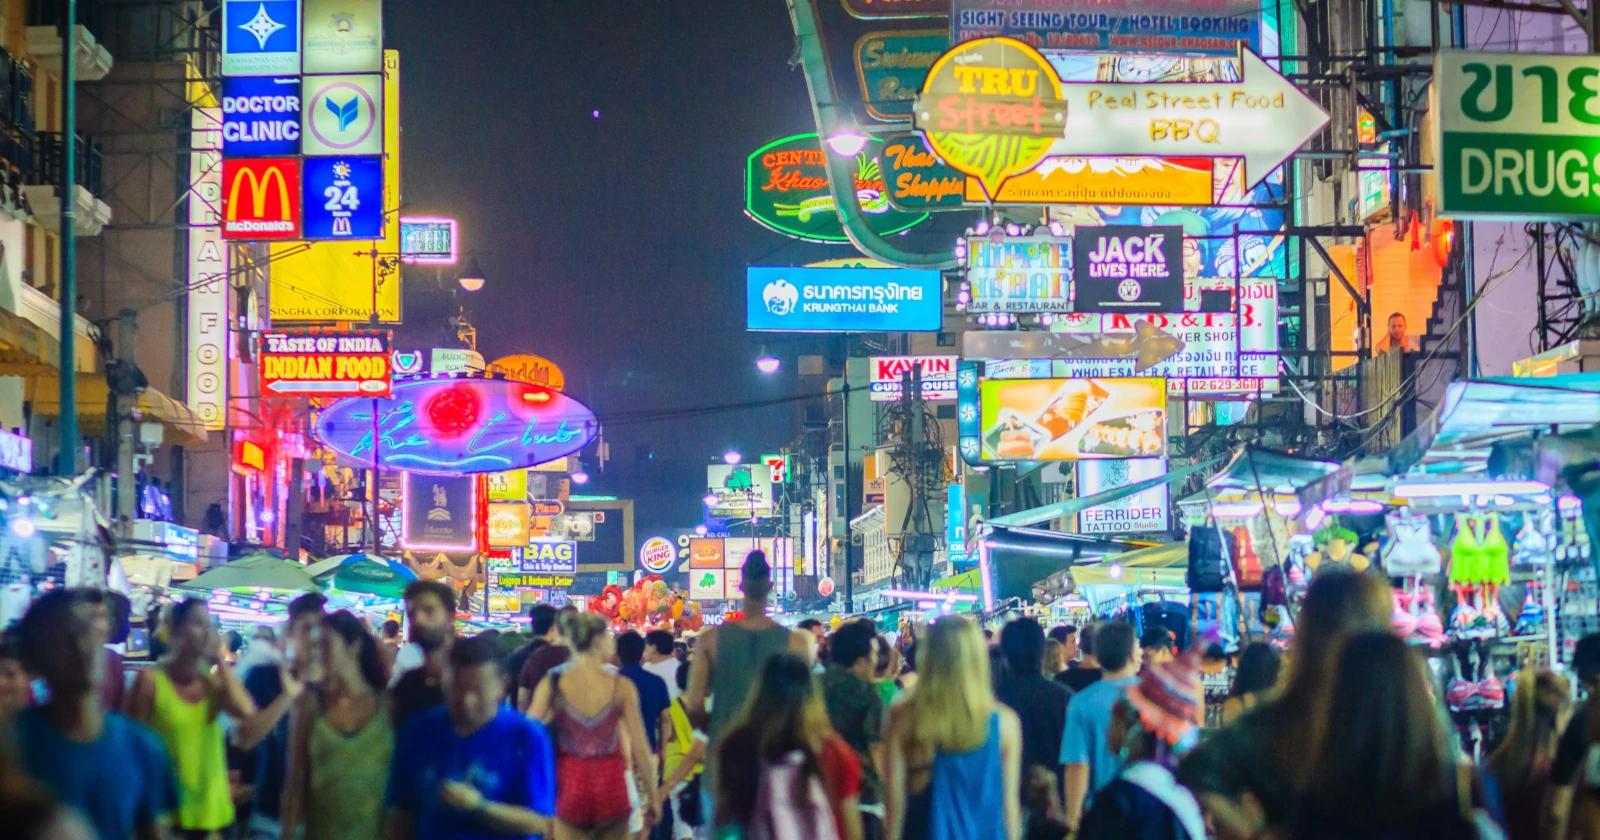 Experience the nightlife of Bangkok, Thailand, on its famous party streets.